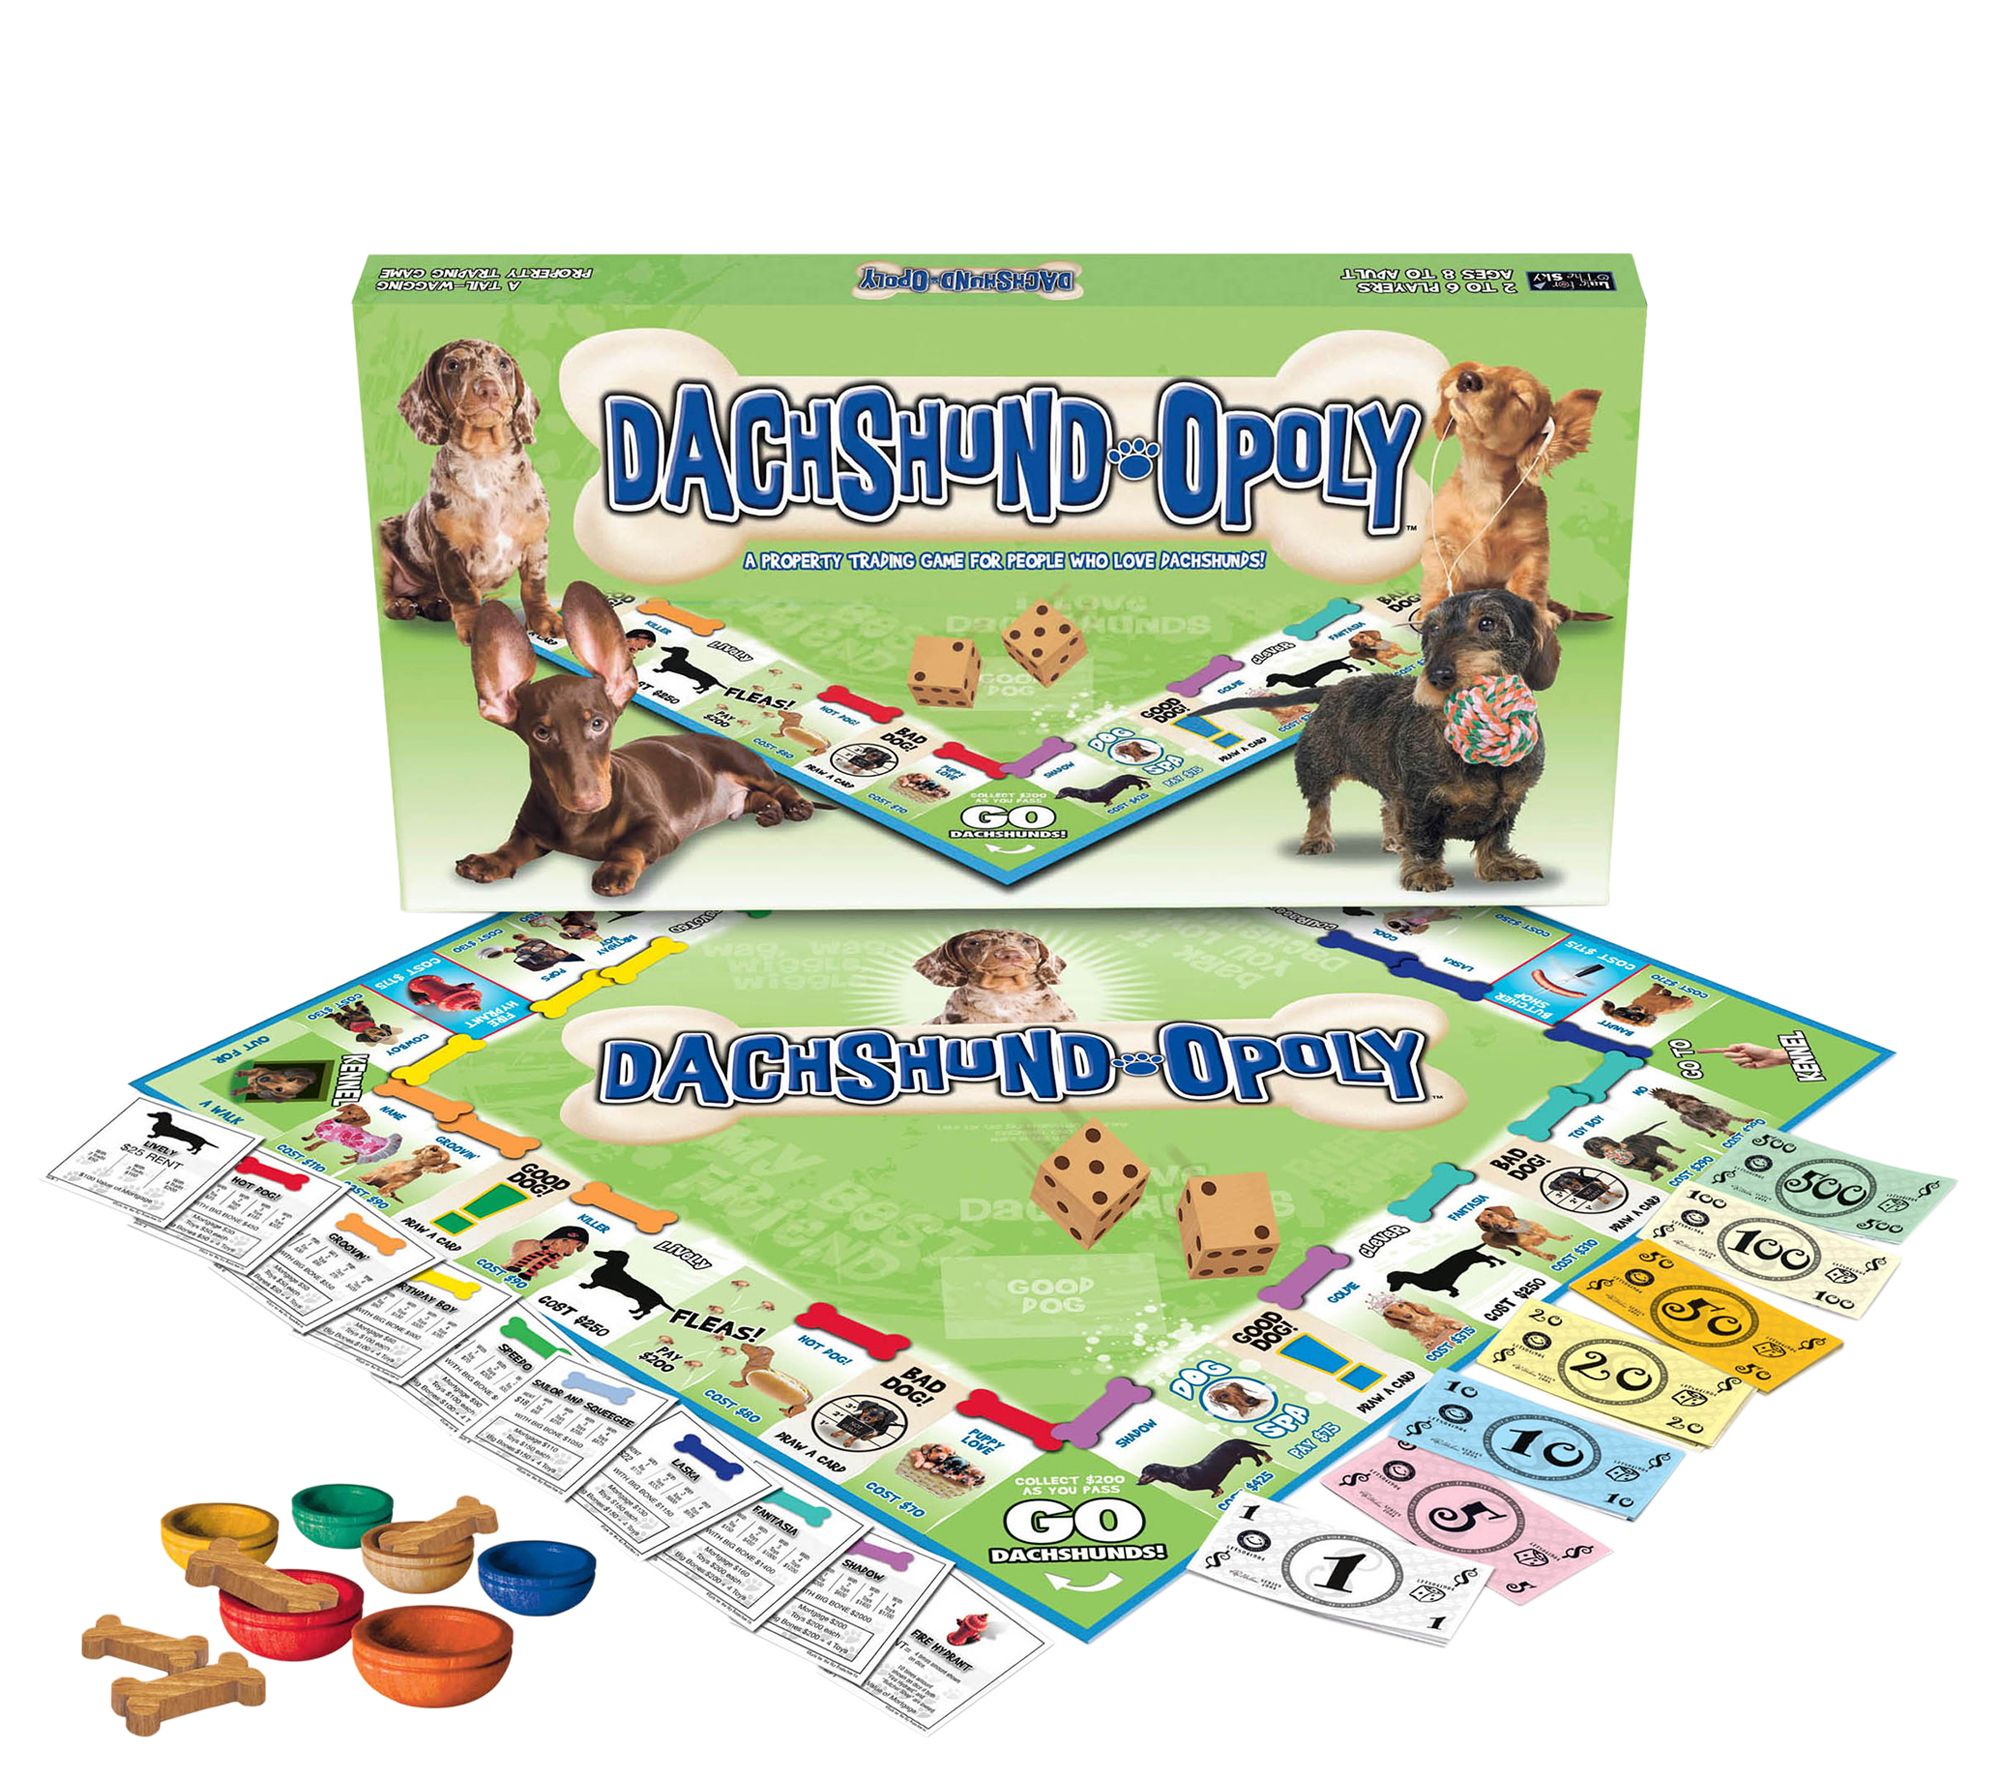 Teckel-Opoly famille Board Game 